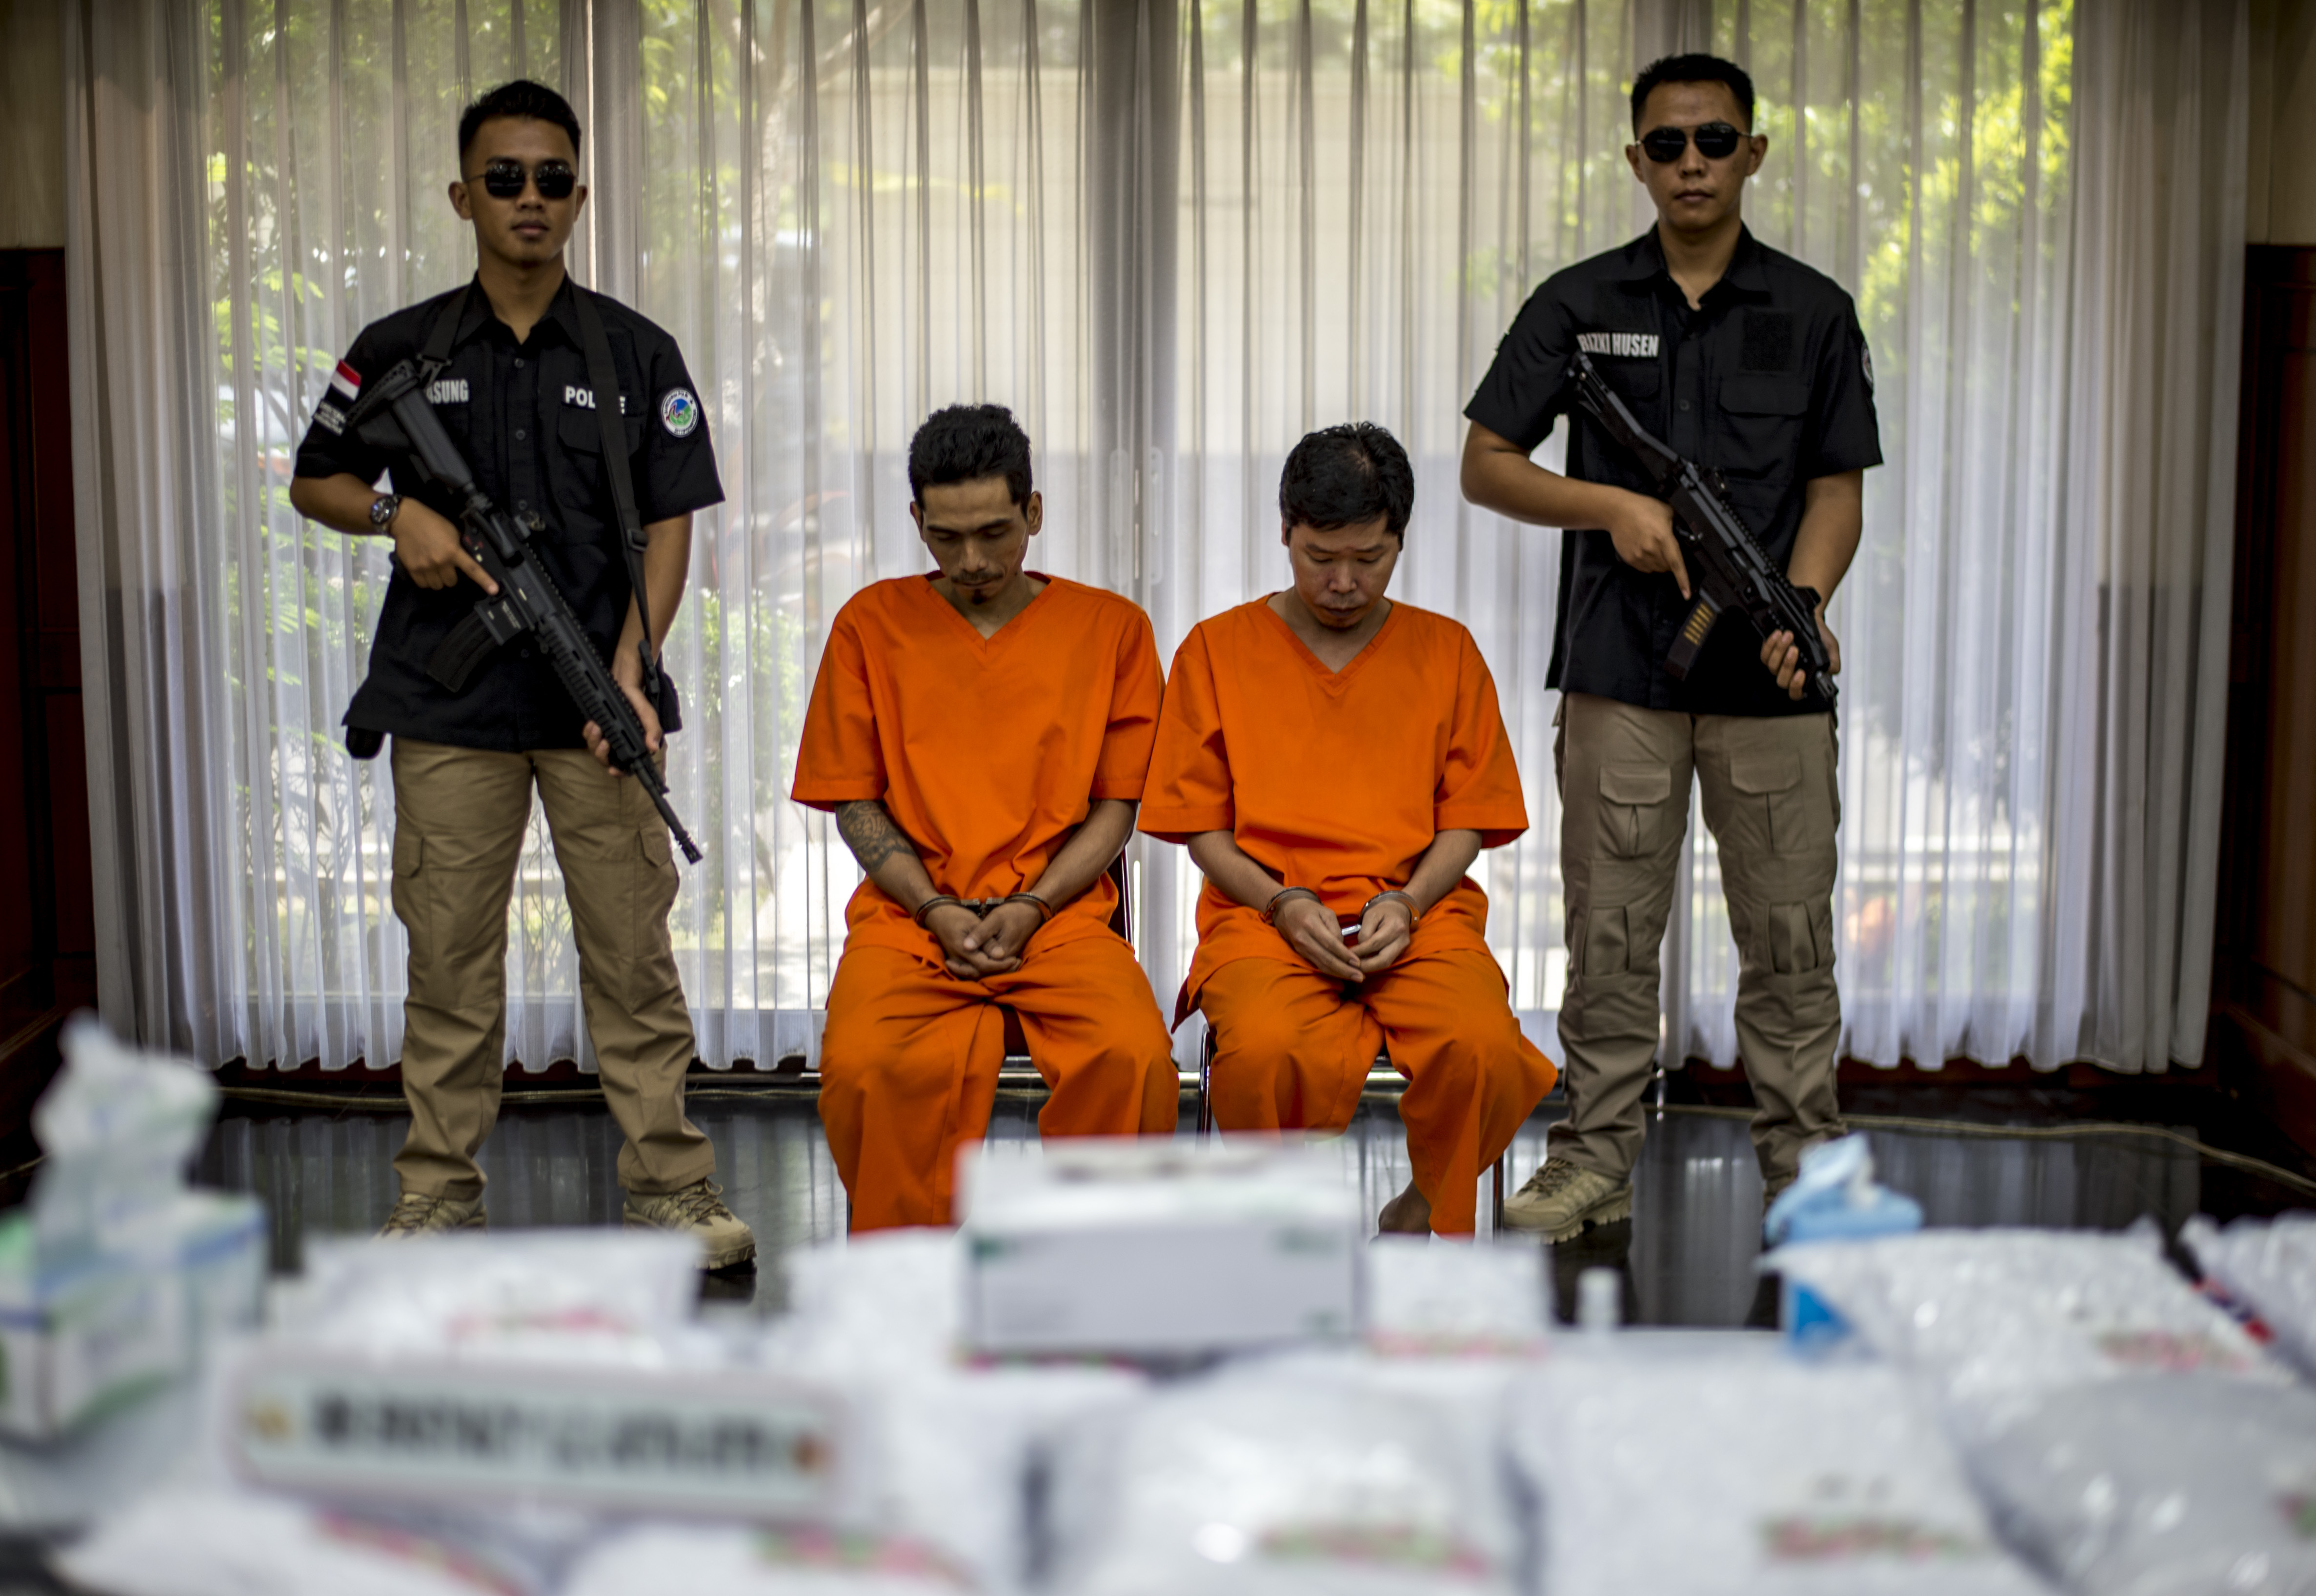 Indonesian narcotics police guard two suspects during a press conference in Jakarta on August 1, 2017. (Bay Ismoyo—AFP/Getty Images)